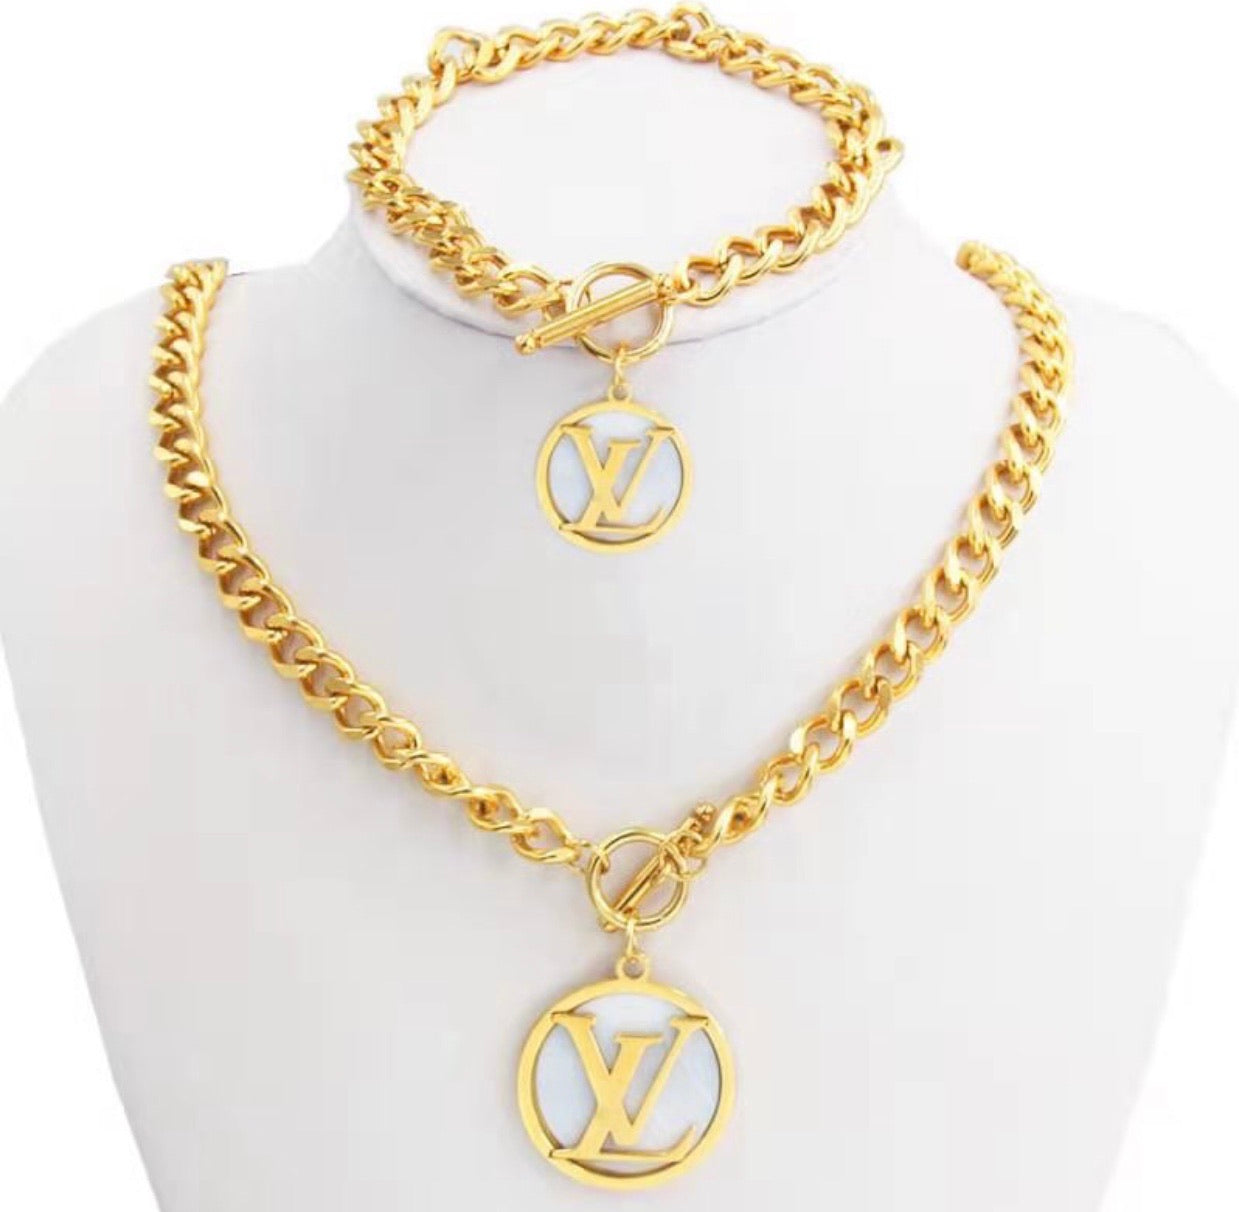 LV Gold and White Necklace and Hand band